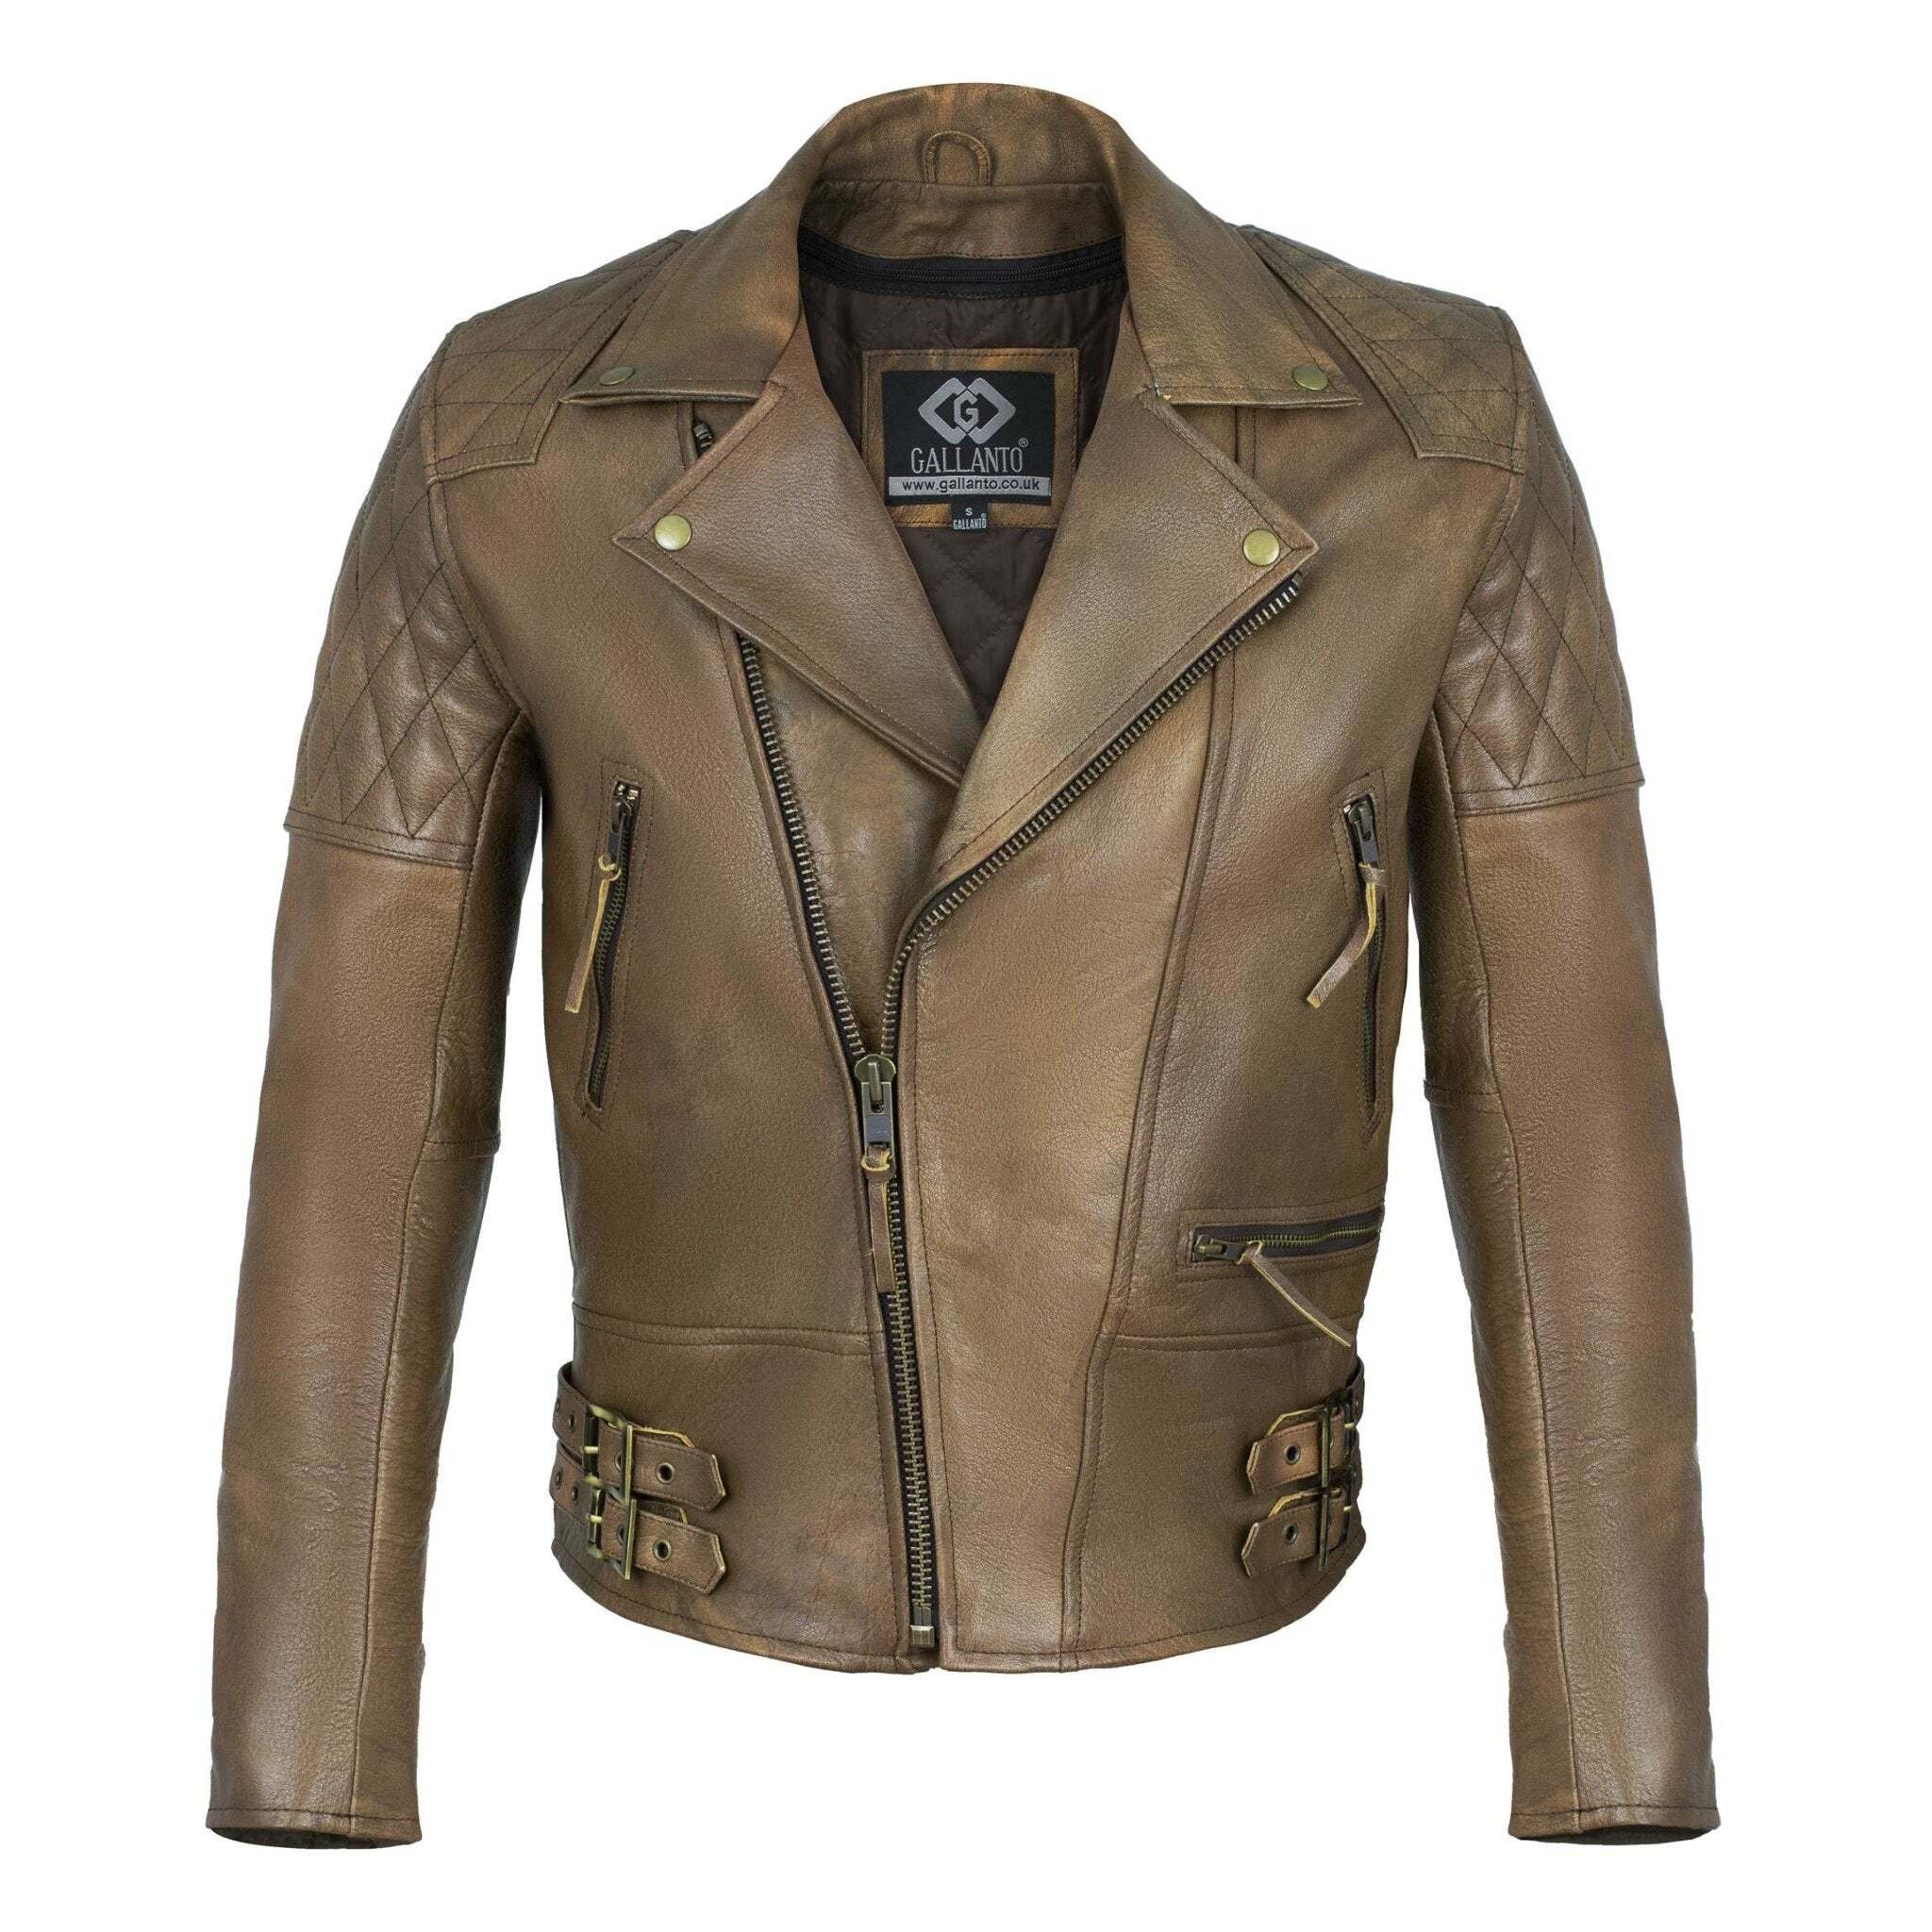 Classic Diamond Armoured Brown Biker Leather Jacket Motorcycle